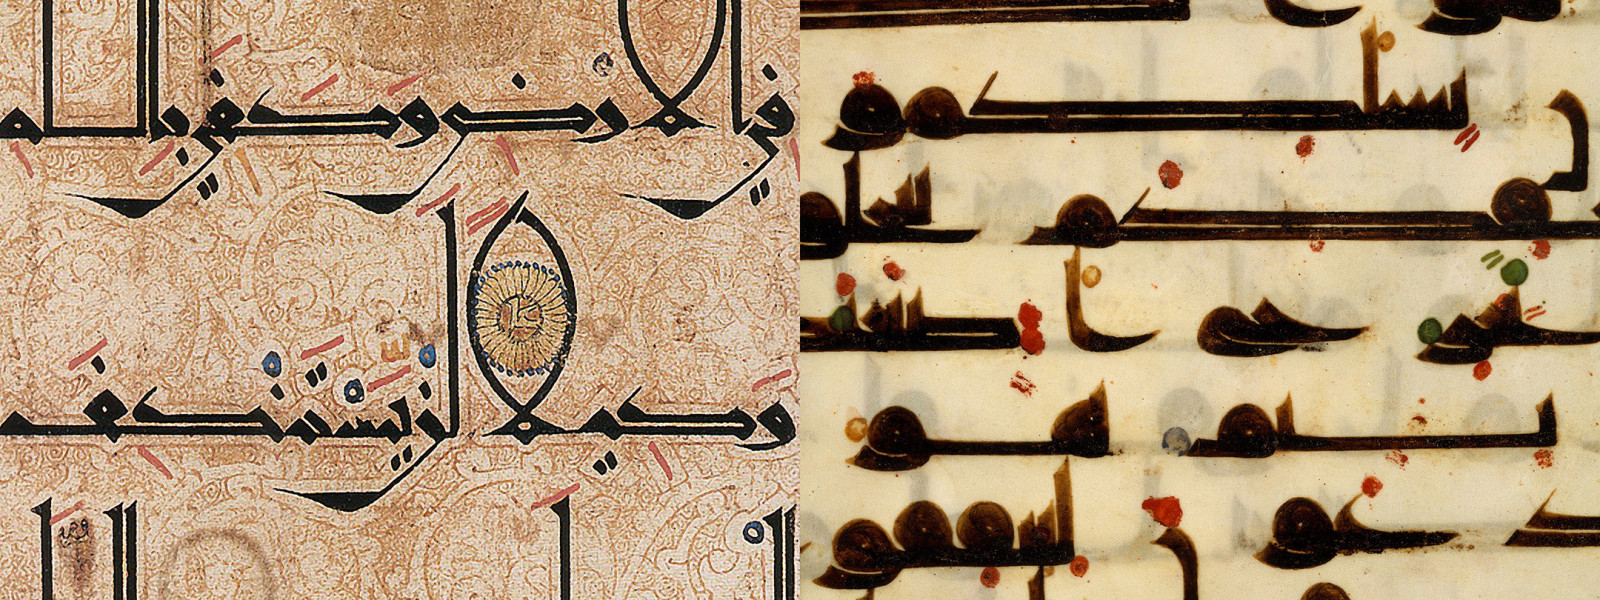 Workshops - Introduction to Arabic Calligraphy: Diwani